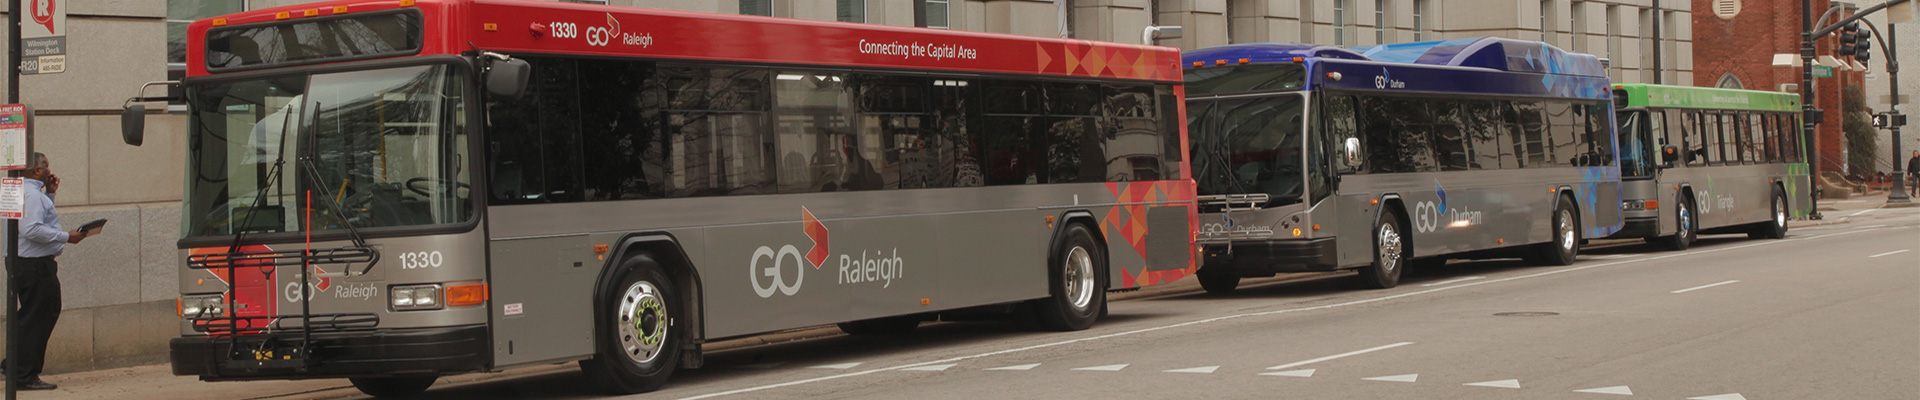 A GoRaleigh bus, a GoDurham bus and a GoTriangle bus parked next to each other